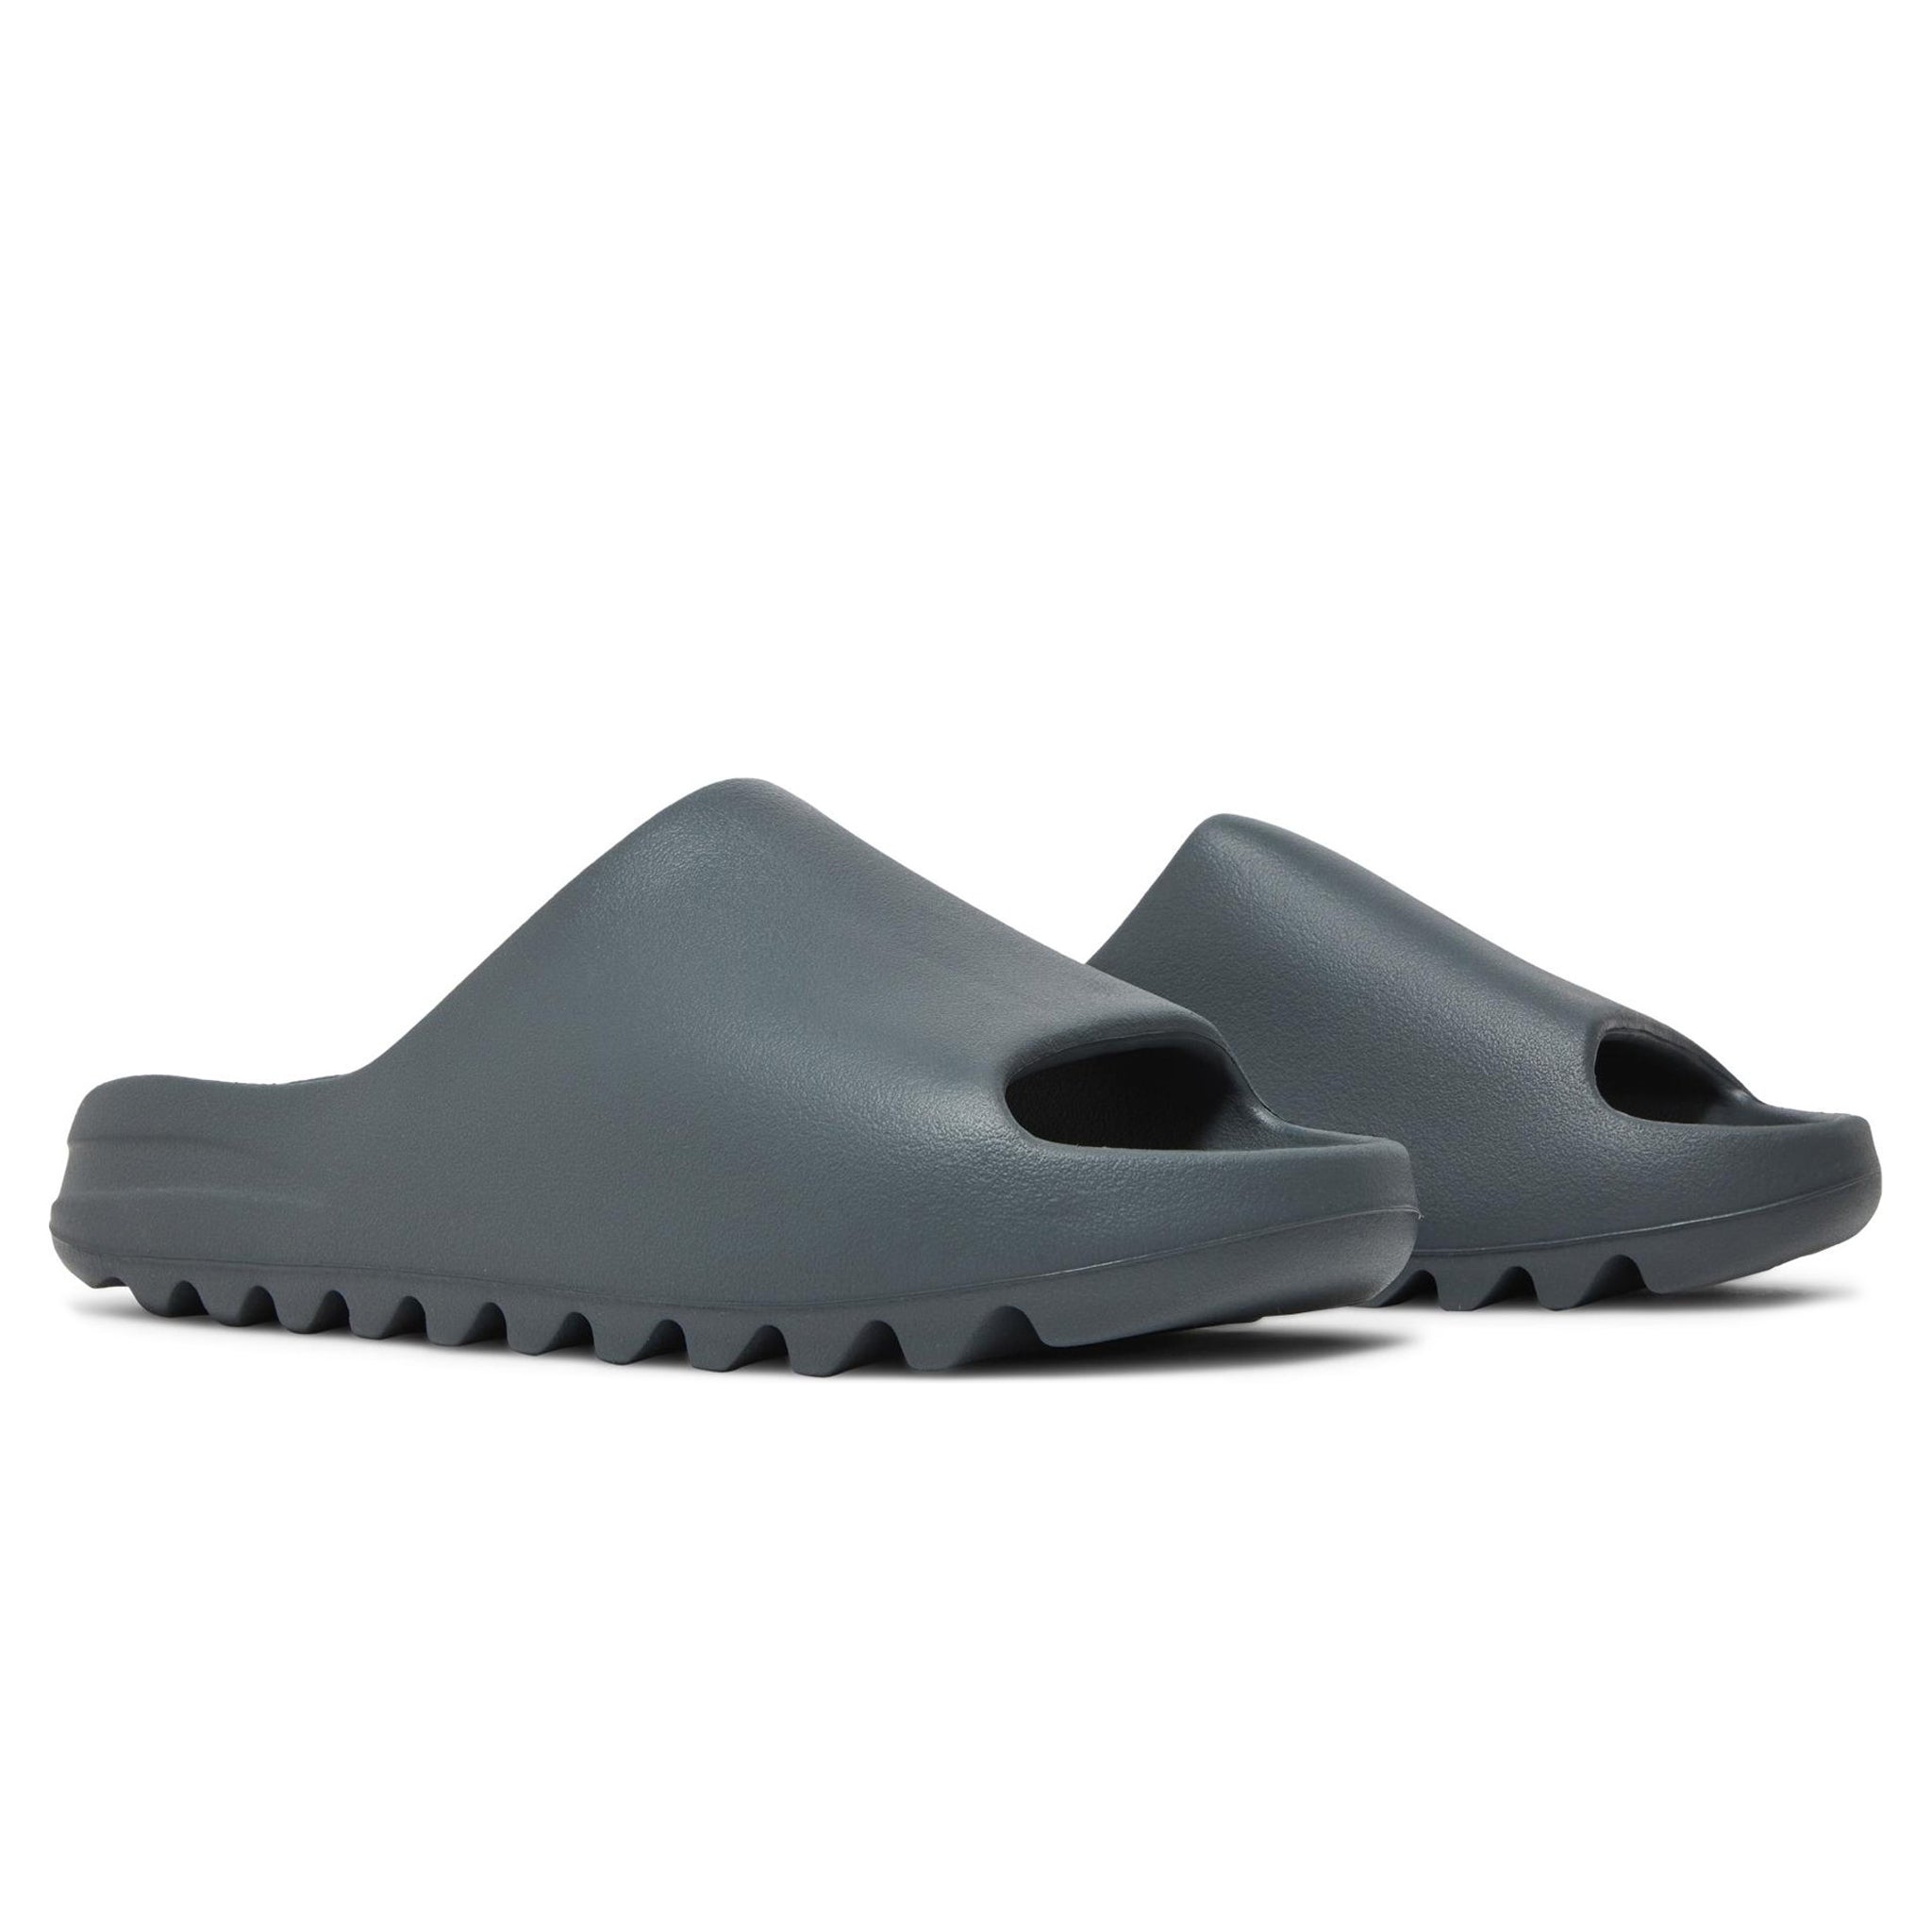 Front side view of Adidas Yeezy Slide Slate Grey ID2350